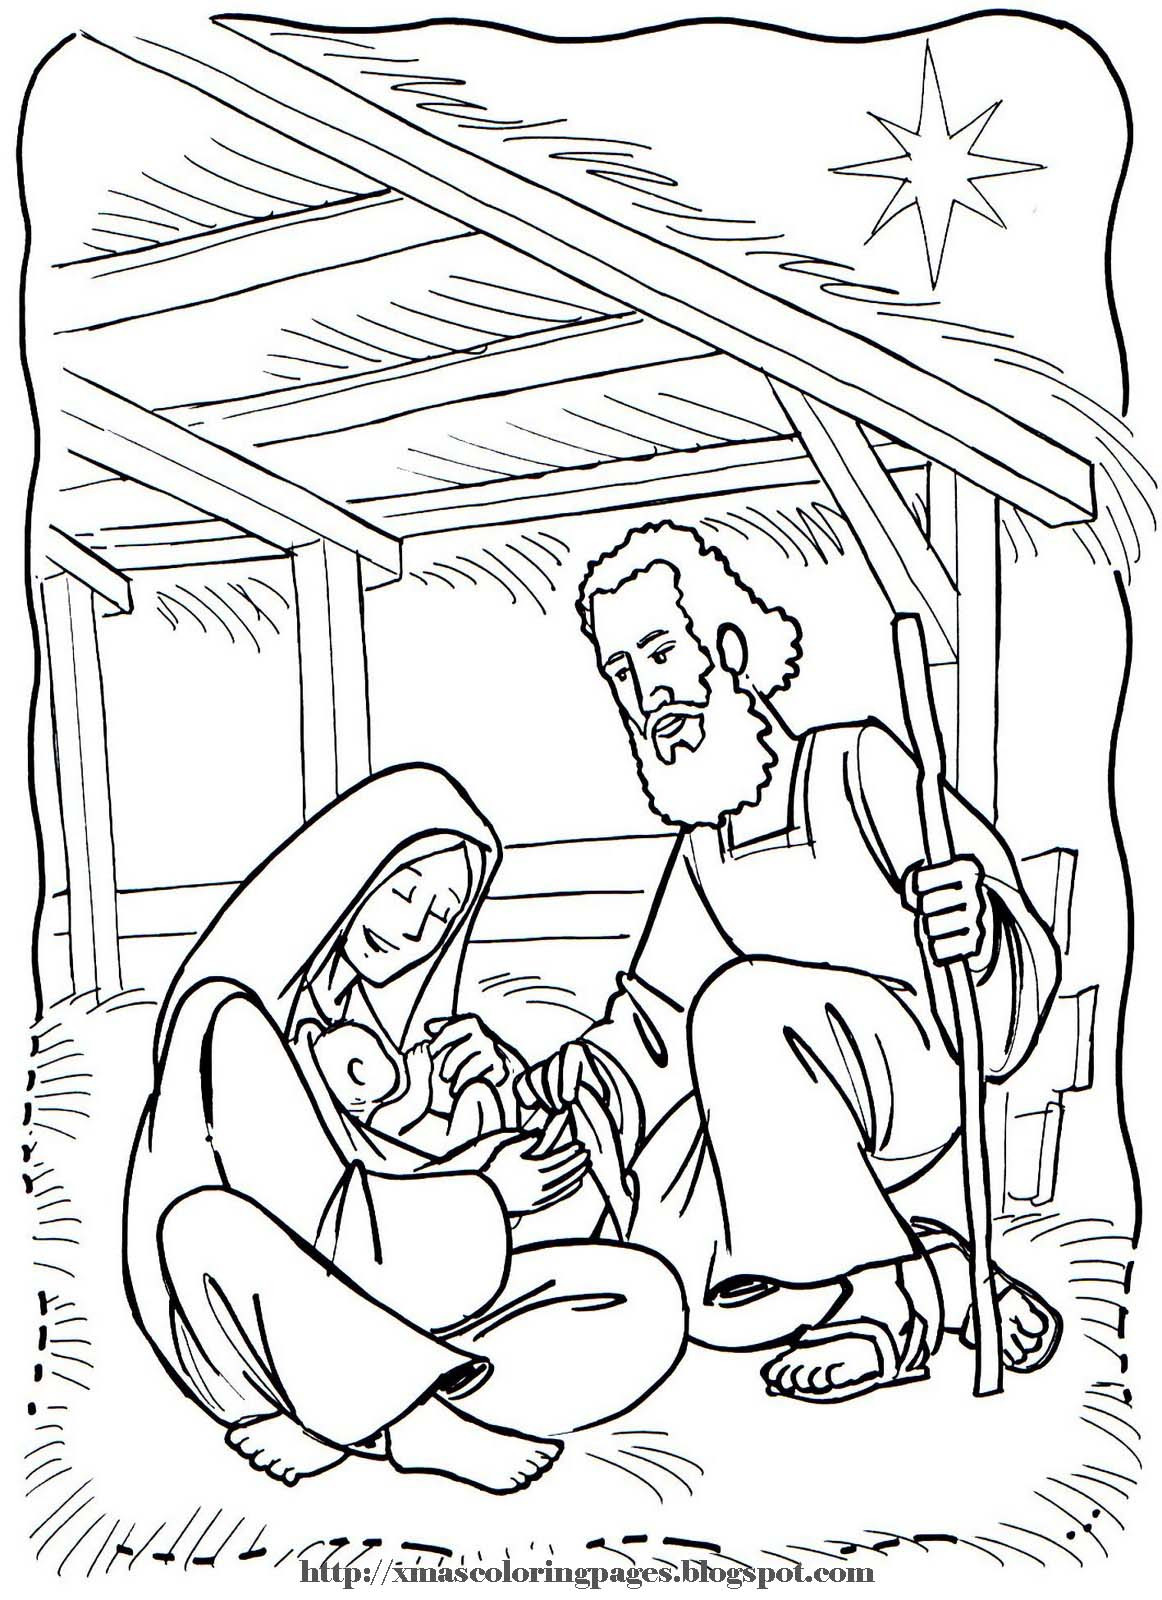 21 Ideas for Baby Jesus Coloring Pages - Home, Family, Style and Art Ideas